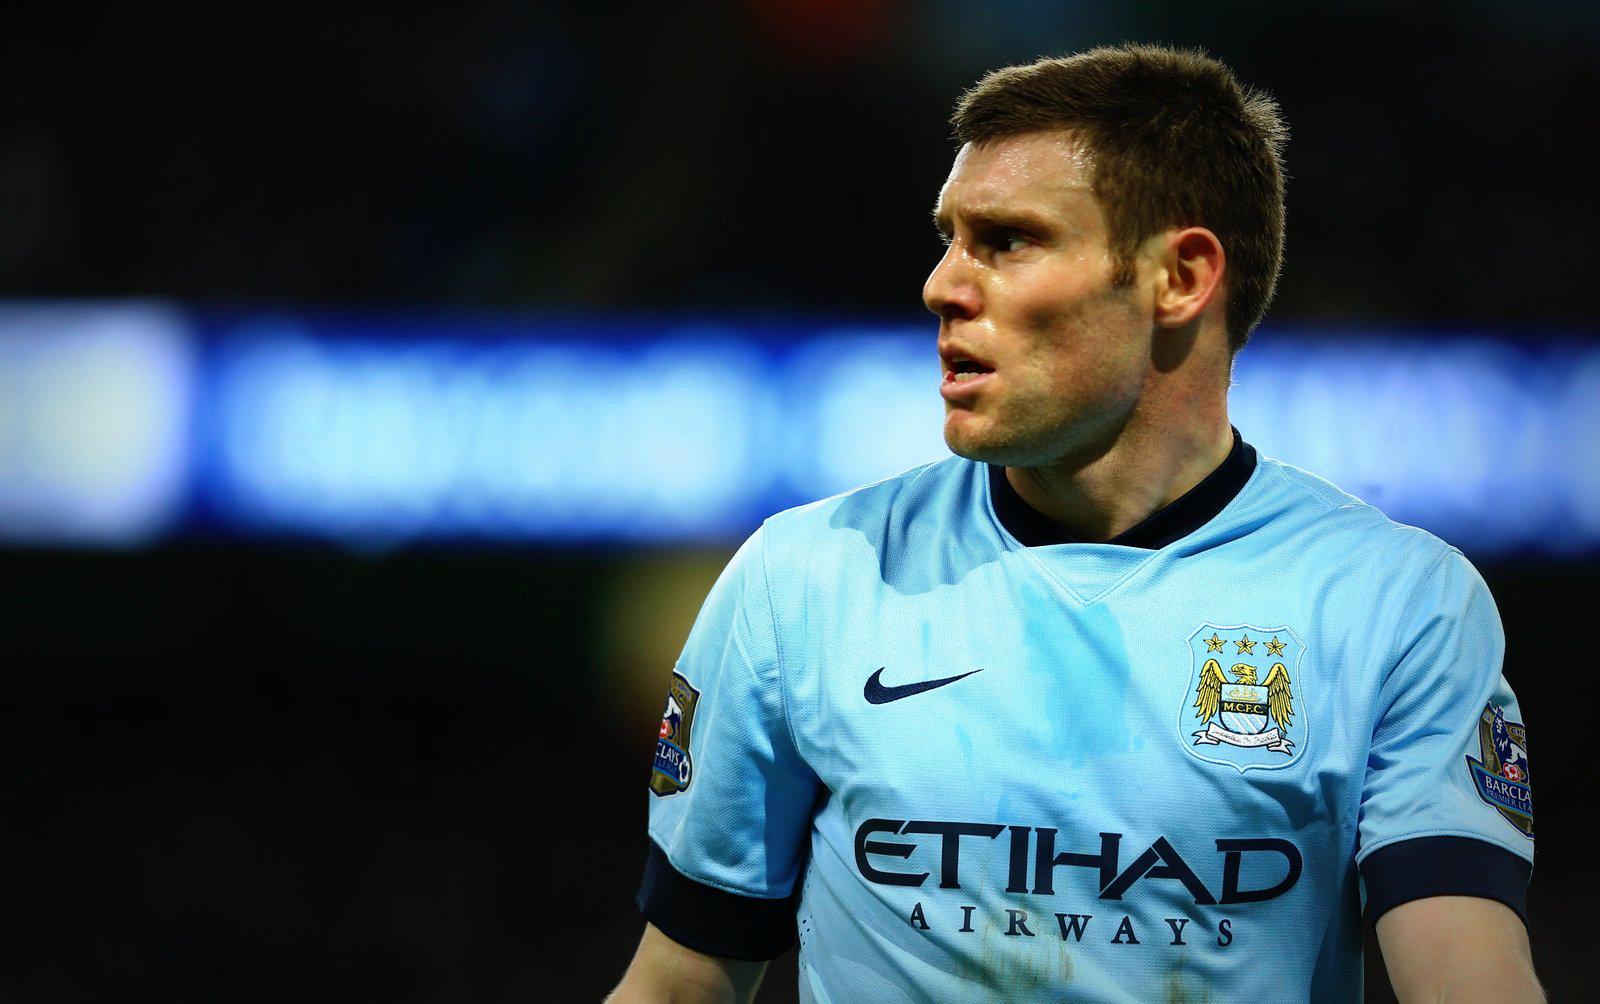 Join us in wishing James Milner a very happy 29th birthday today! 